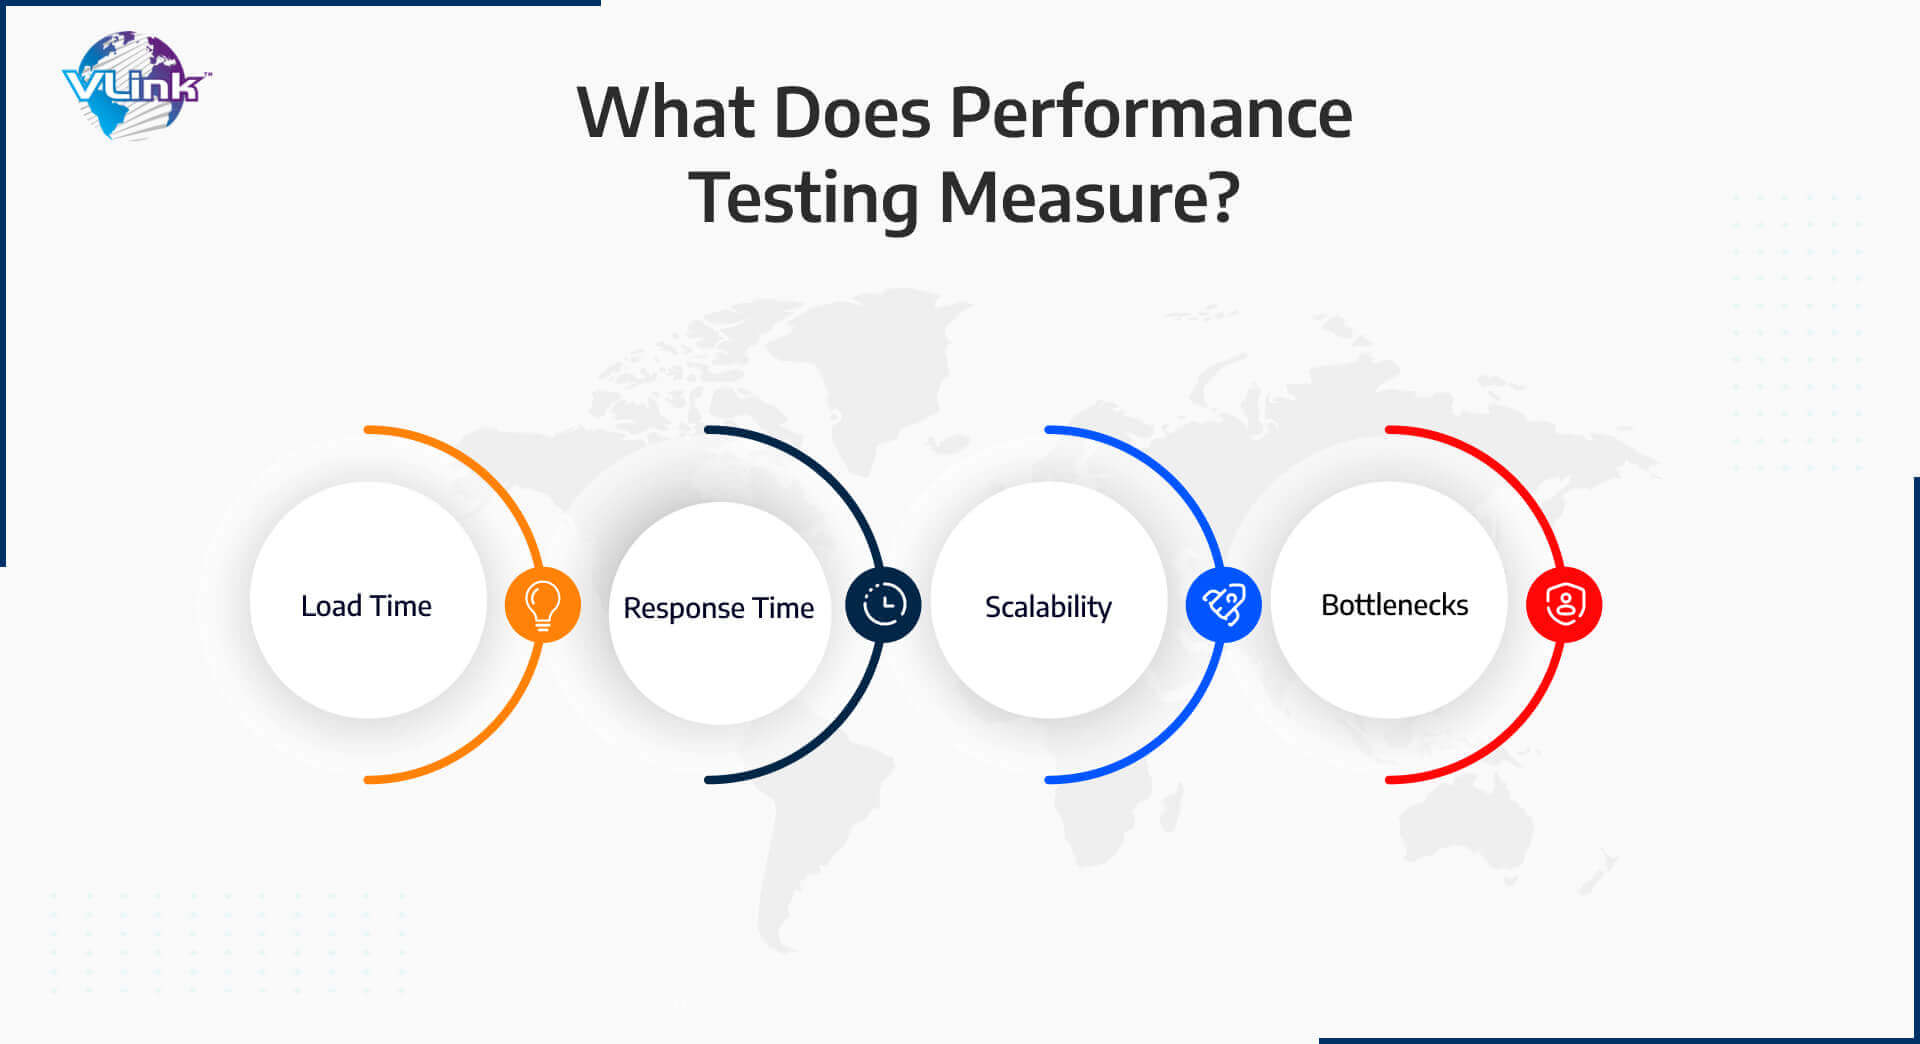 What Does Performance Testing Measure